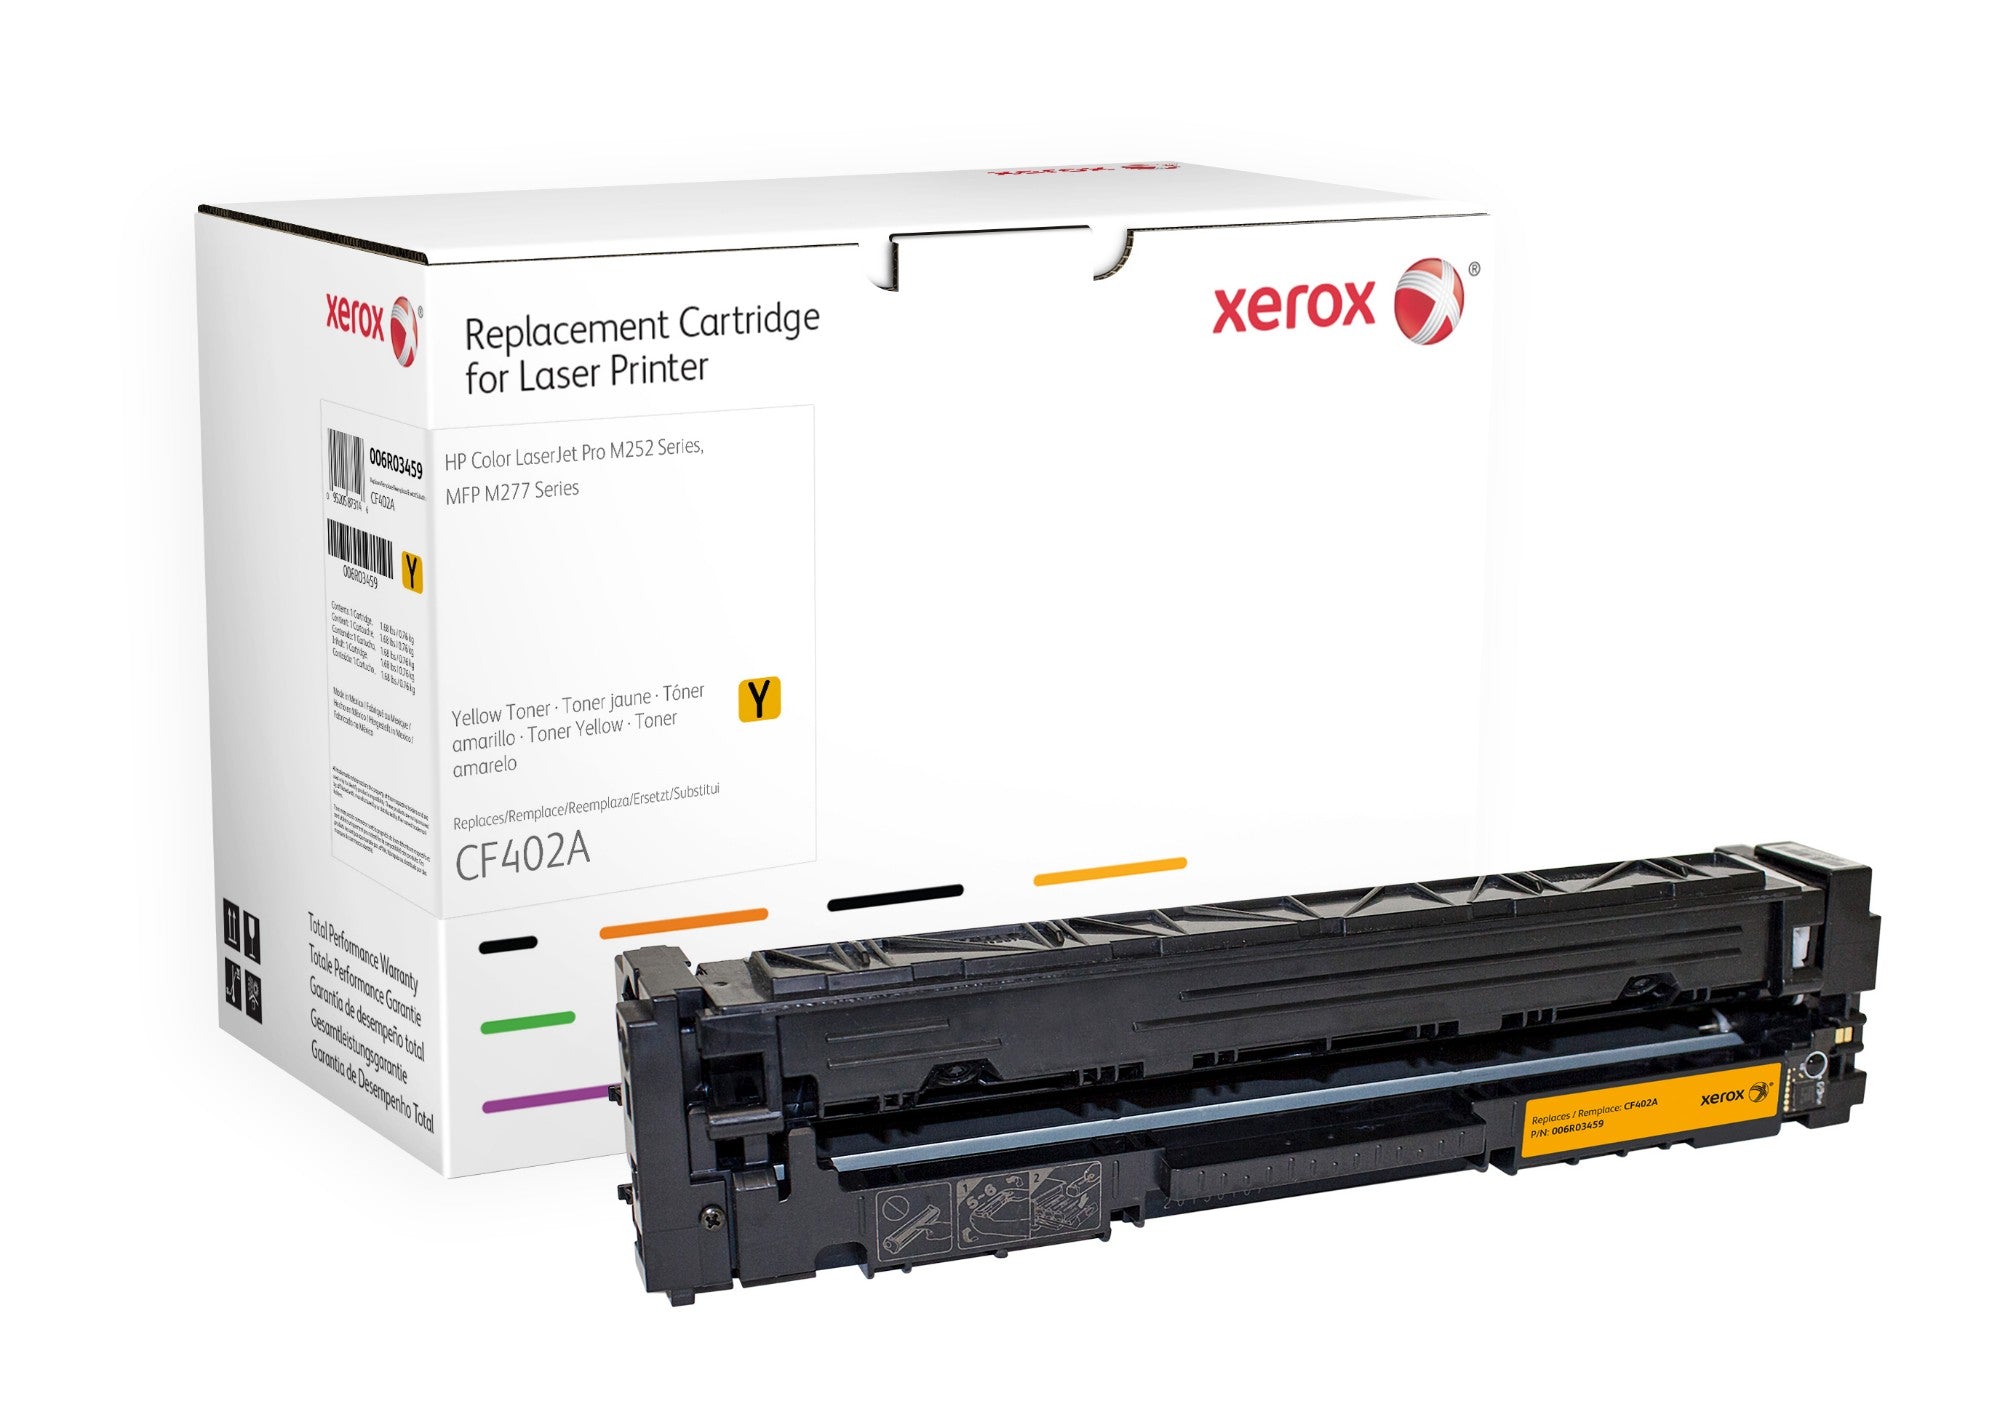 Xerox 006R03459 Toner cartridge yellow, 1.4K pages (replaces HP 201A/CF402A) for HP Pro M 252